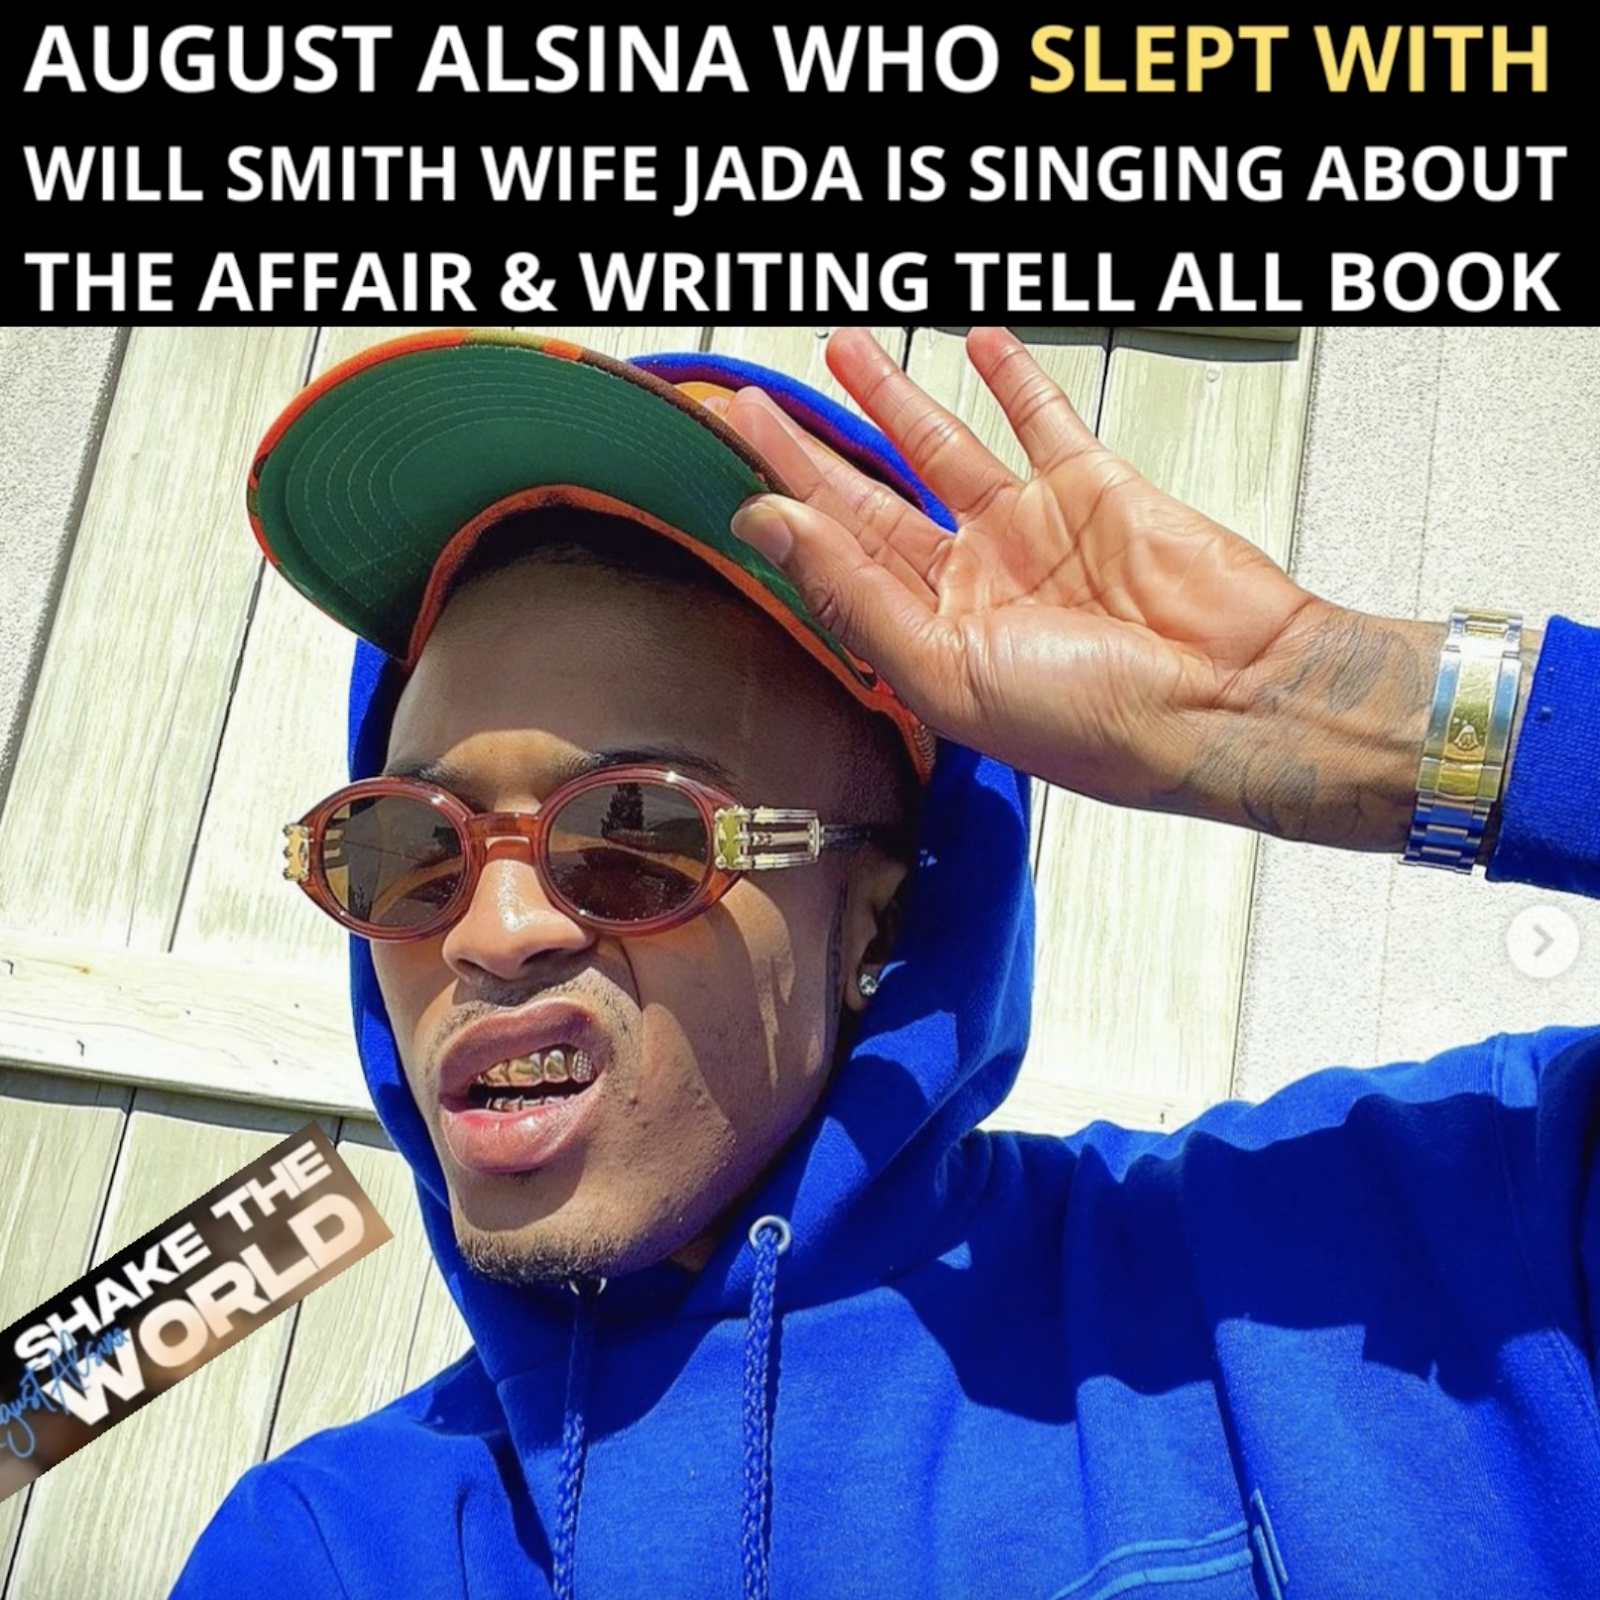 Will Smith Humiliated By August Alsina Entanglement Song And Pending Tell All Book Detailing Him And Jada’s Affair